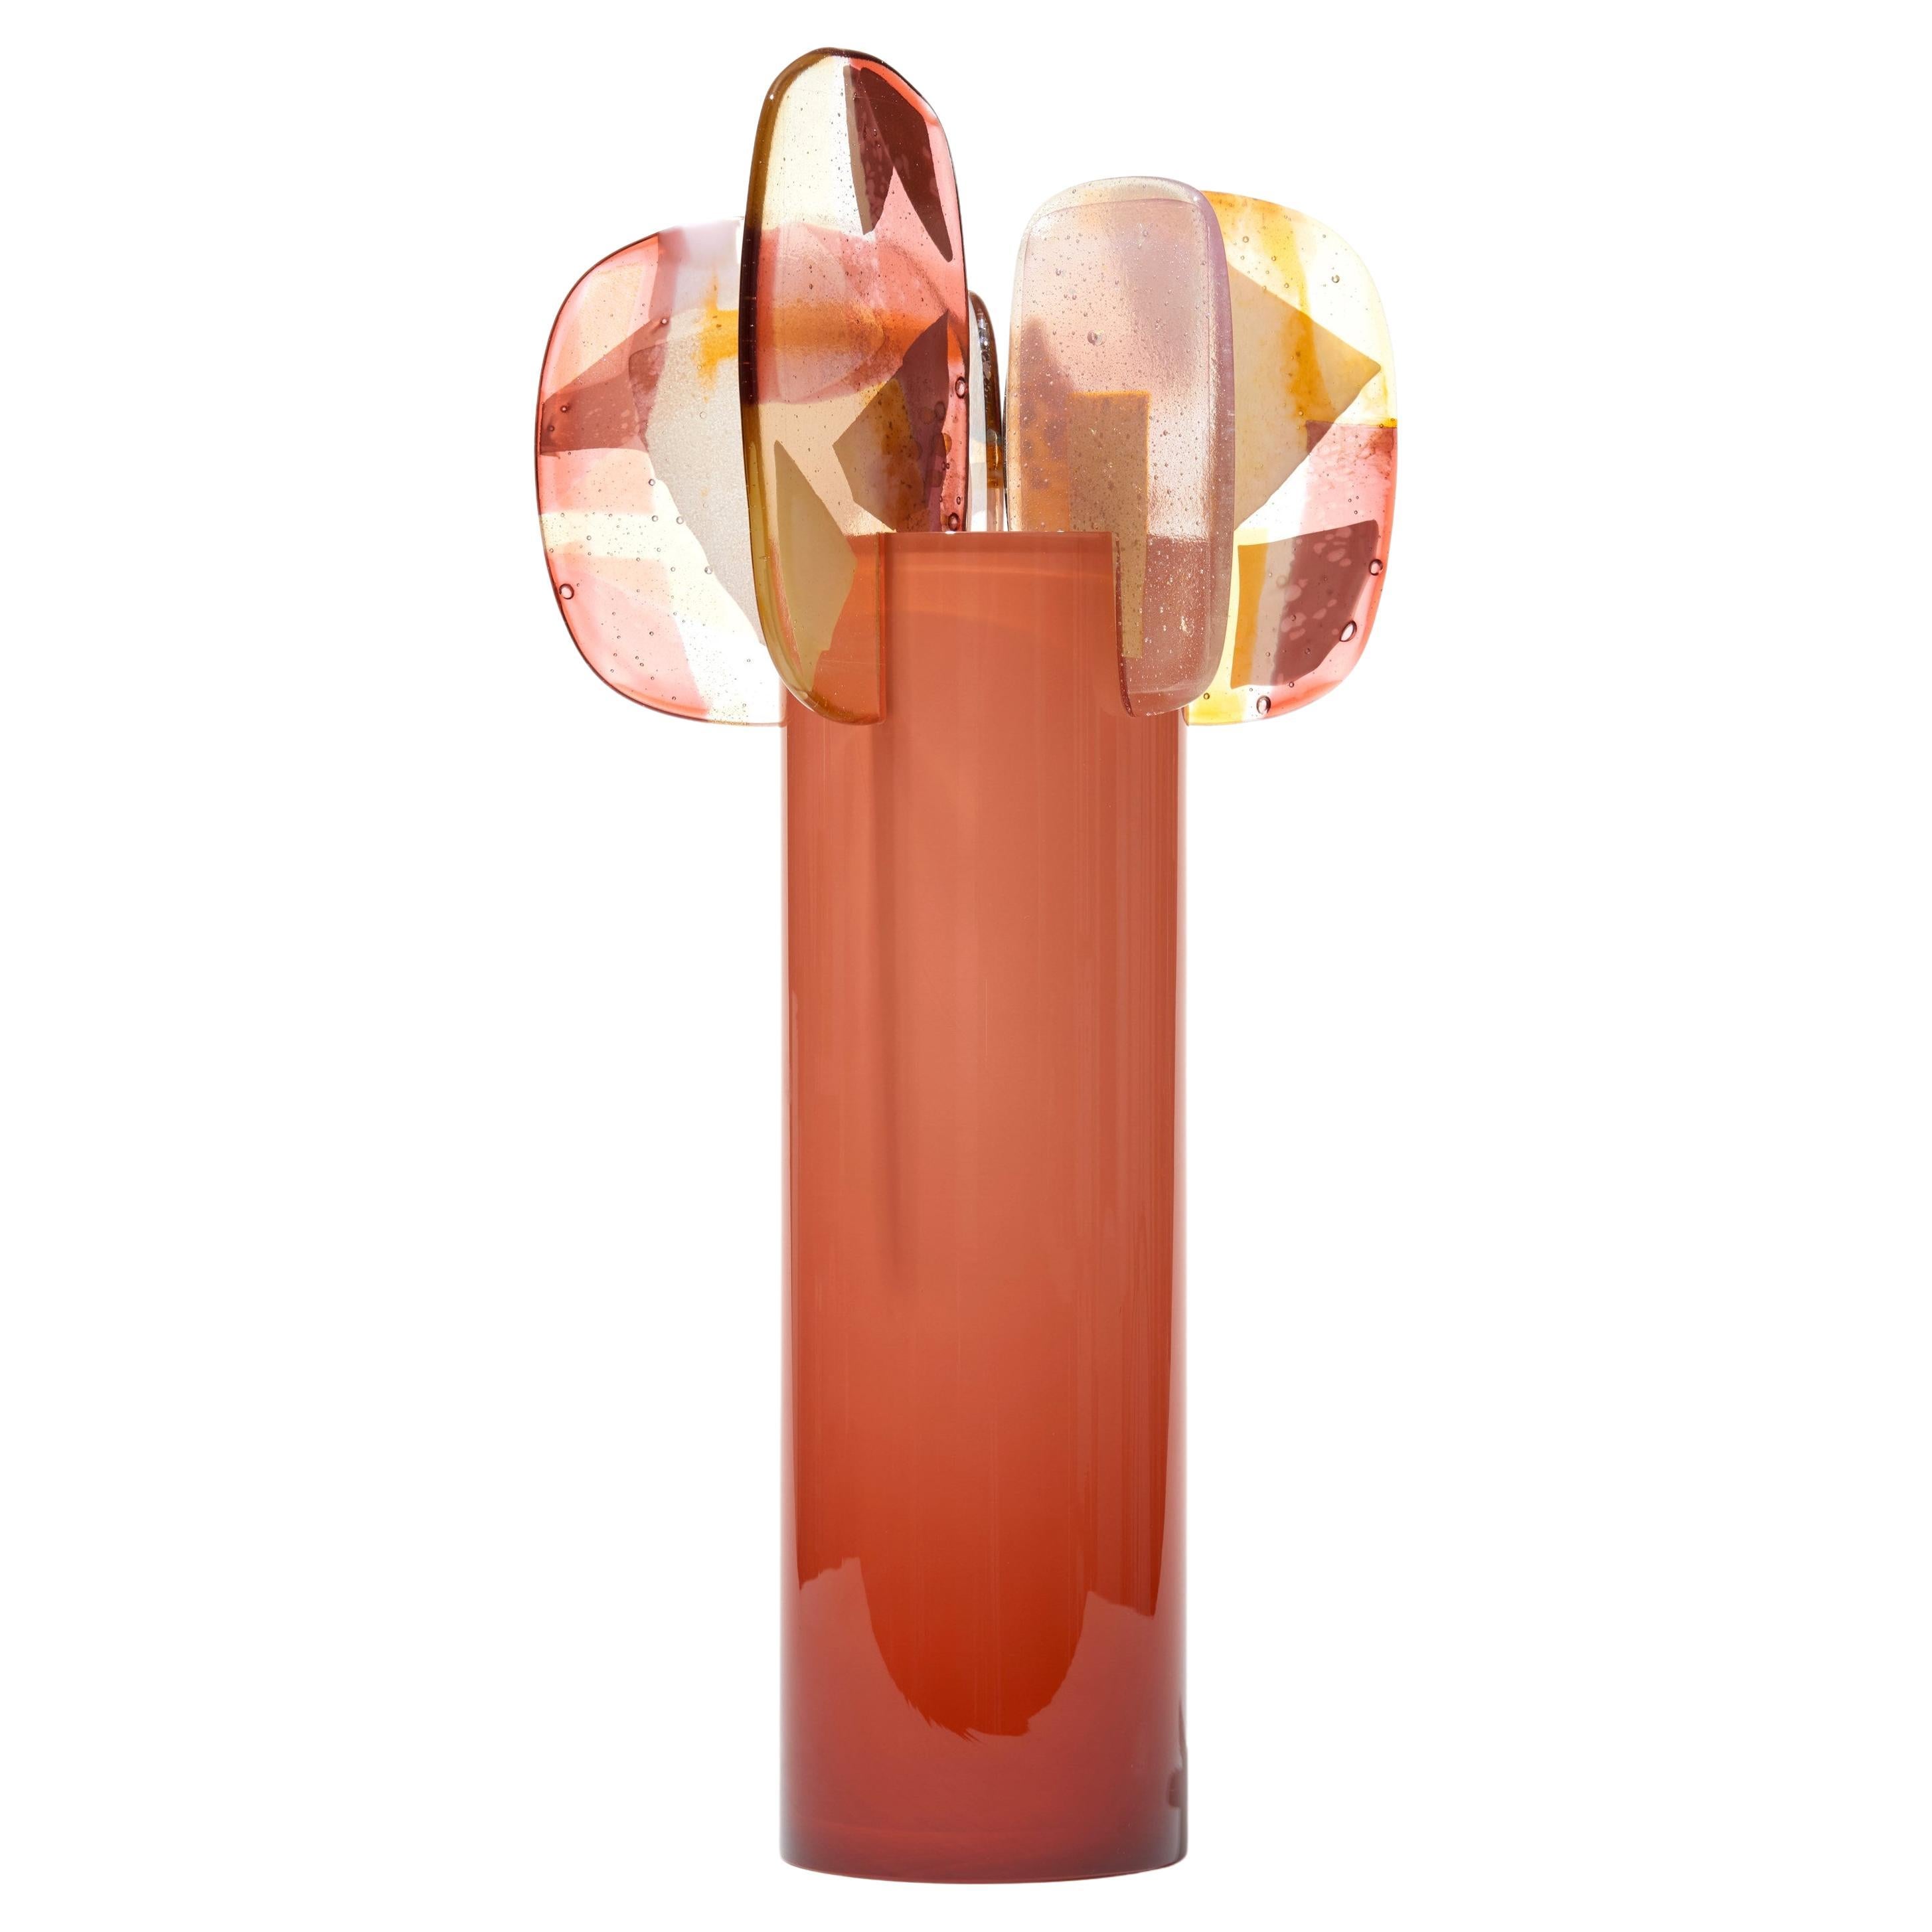 Paradise 04 in Morganite, peach, pink, & yellow glass sculpture by Amy Cushing